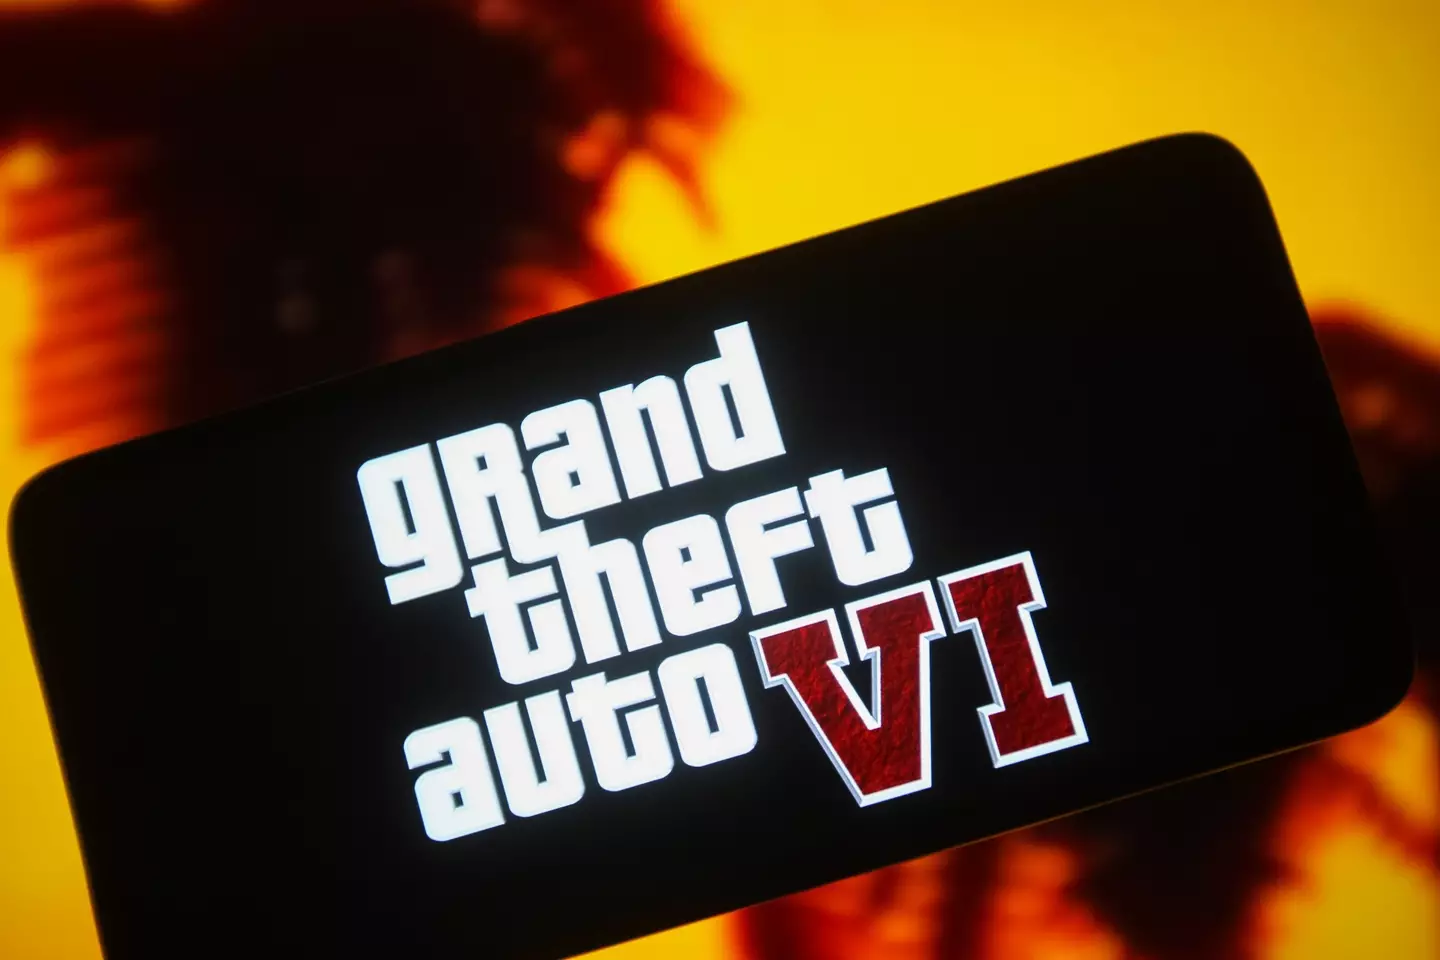 GTA VI has been officially announced by Rockstar Games.